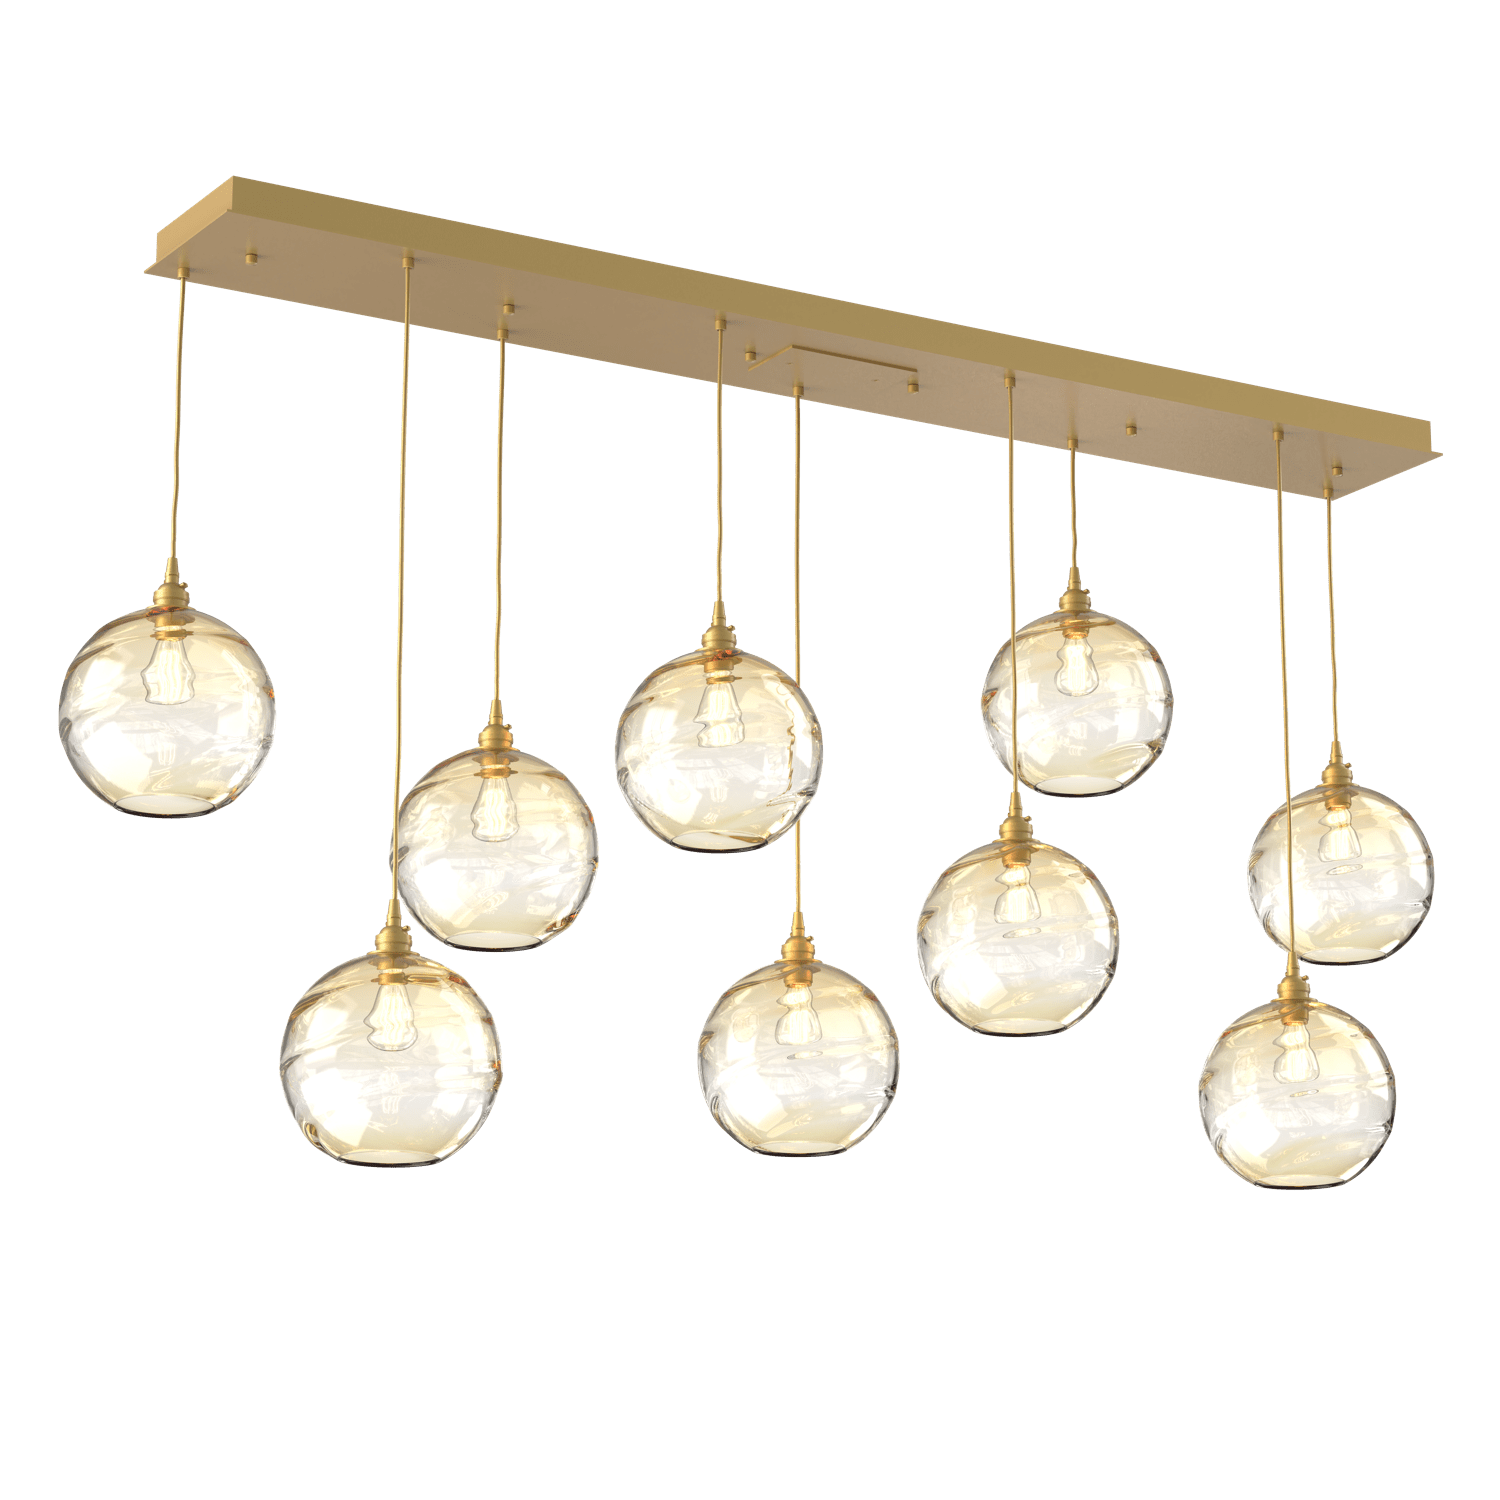 PLB0047-09-GB-OA-Hammerton-Studio-Optic-Blown-Glass-Terra-9-light-linear-pendant-chandelier-with-gilded-brass-finish-and-optic-amber-blown-glass-shades-and-incandescent-lamping